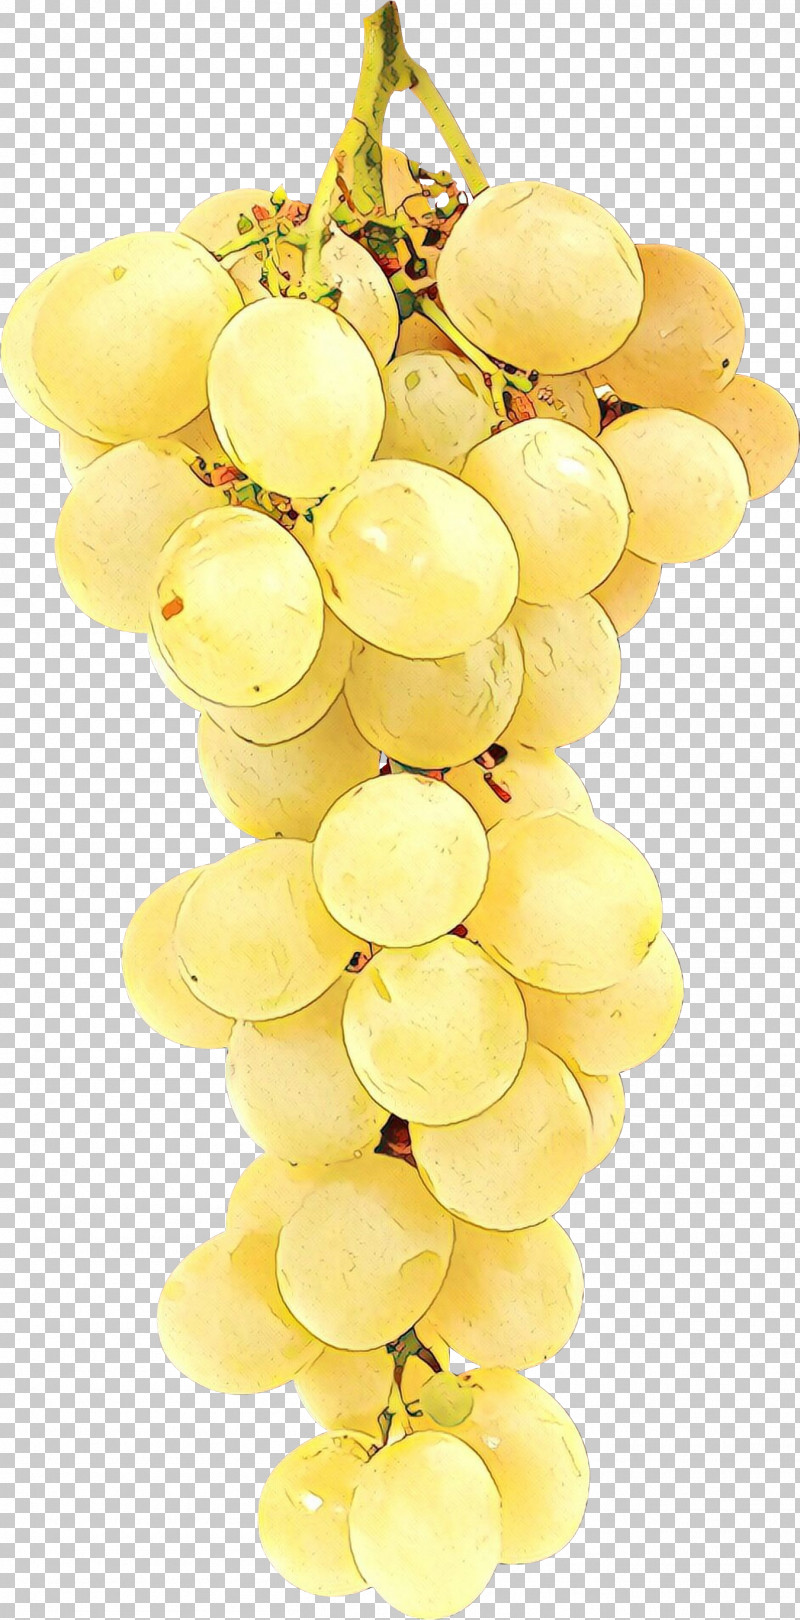 Grape Seedless Fruit Grapevine Family Yellow Sultana PNG, Clipart, Fruit, Grape, Grapevine Family, Plant, Seedless Fruit Free PNG Download